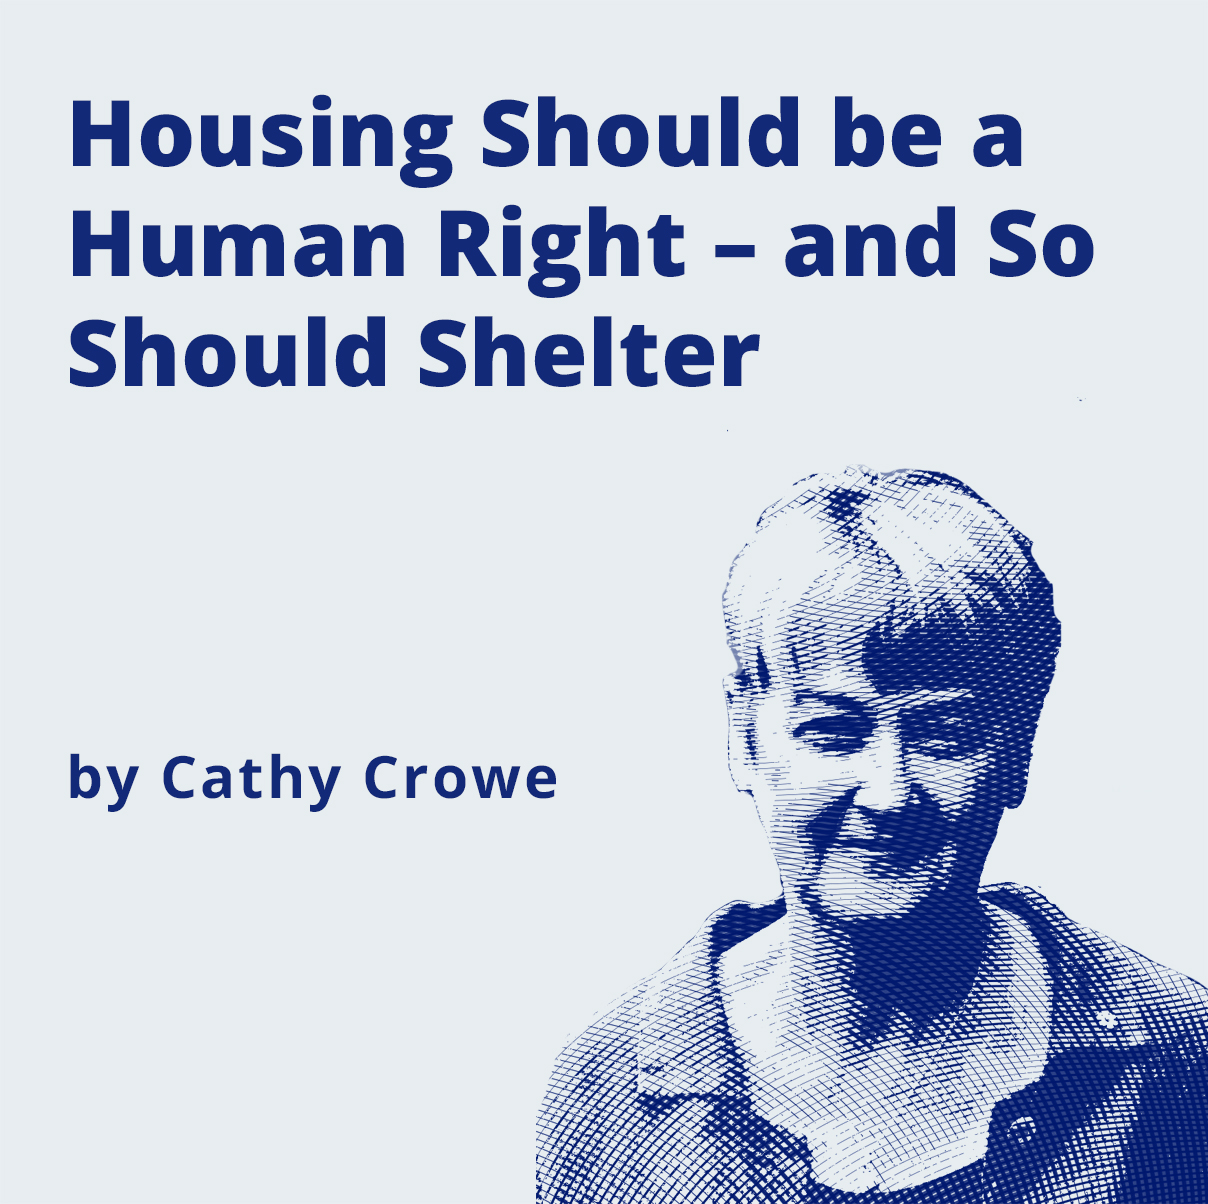 image - Housing Should be a Human Right - and So Should Shelter by Cathy Crowe